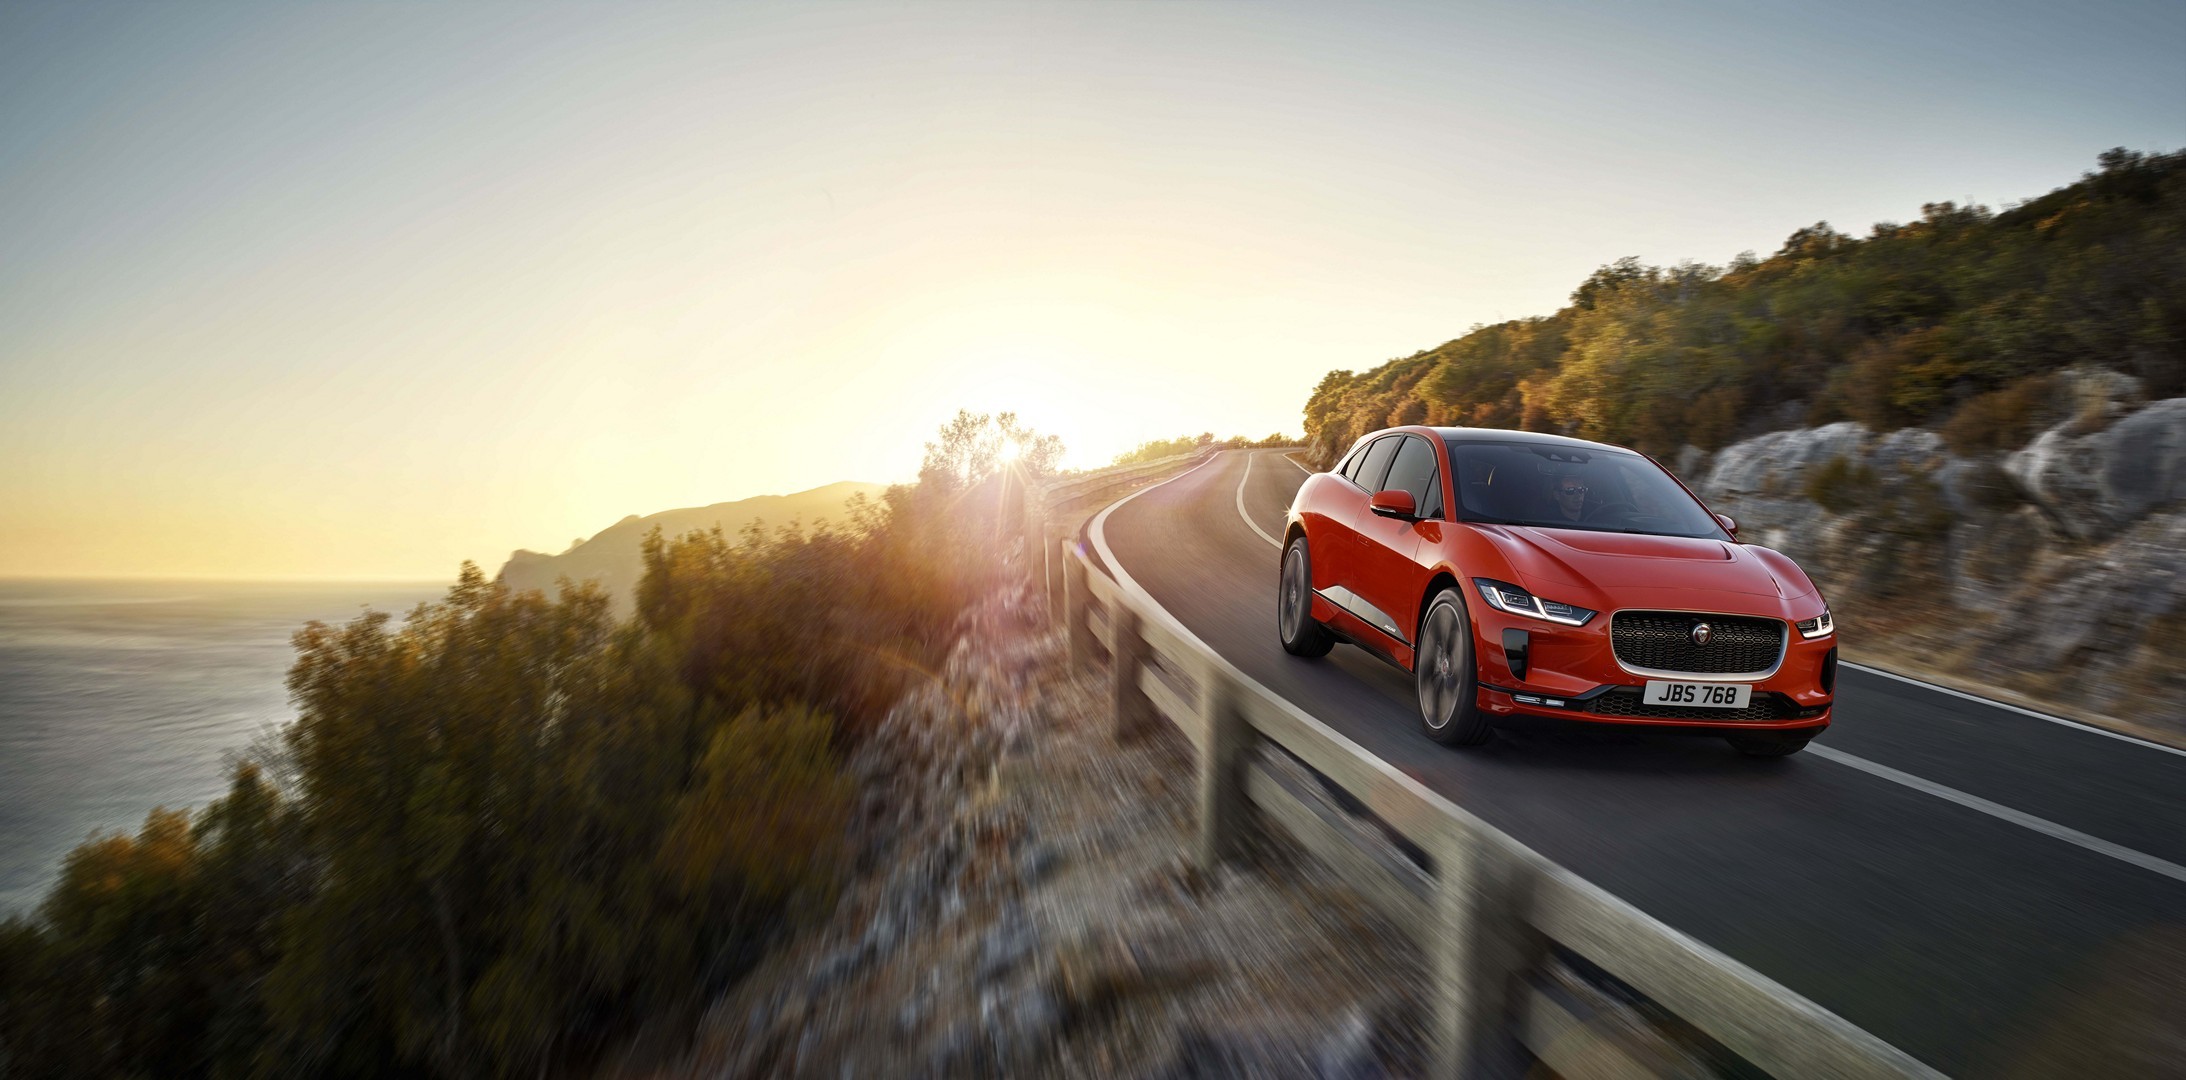 https://s1.cdn.autoevolution.com/images/news/gallery/2020-jaguar-i-pace-update-offers-234-miles-of-range-thanks-to-etrophy-know-how_51.jpg